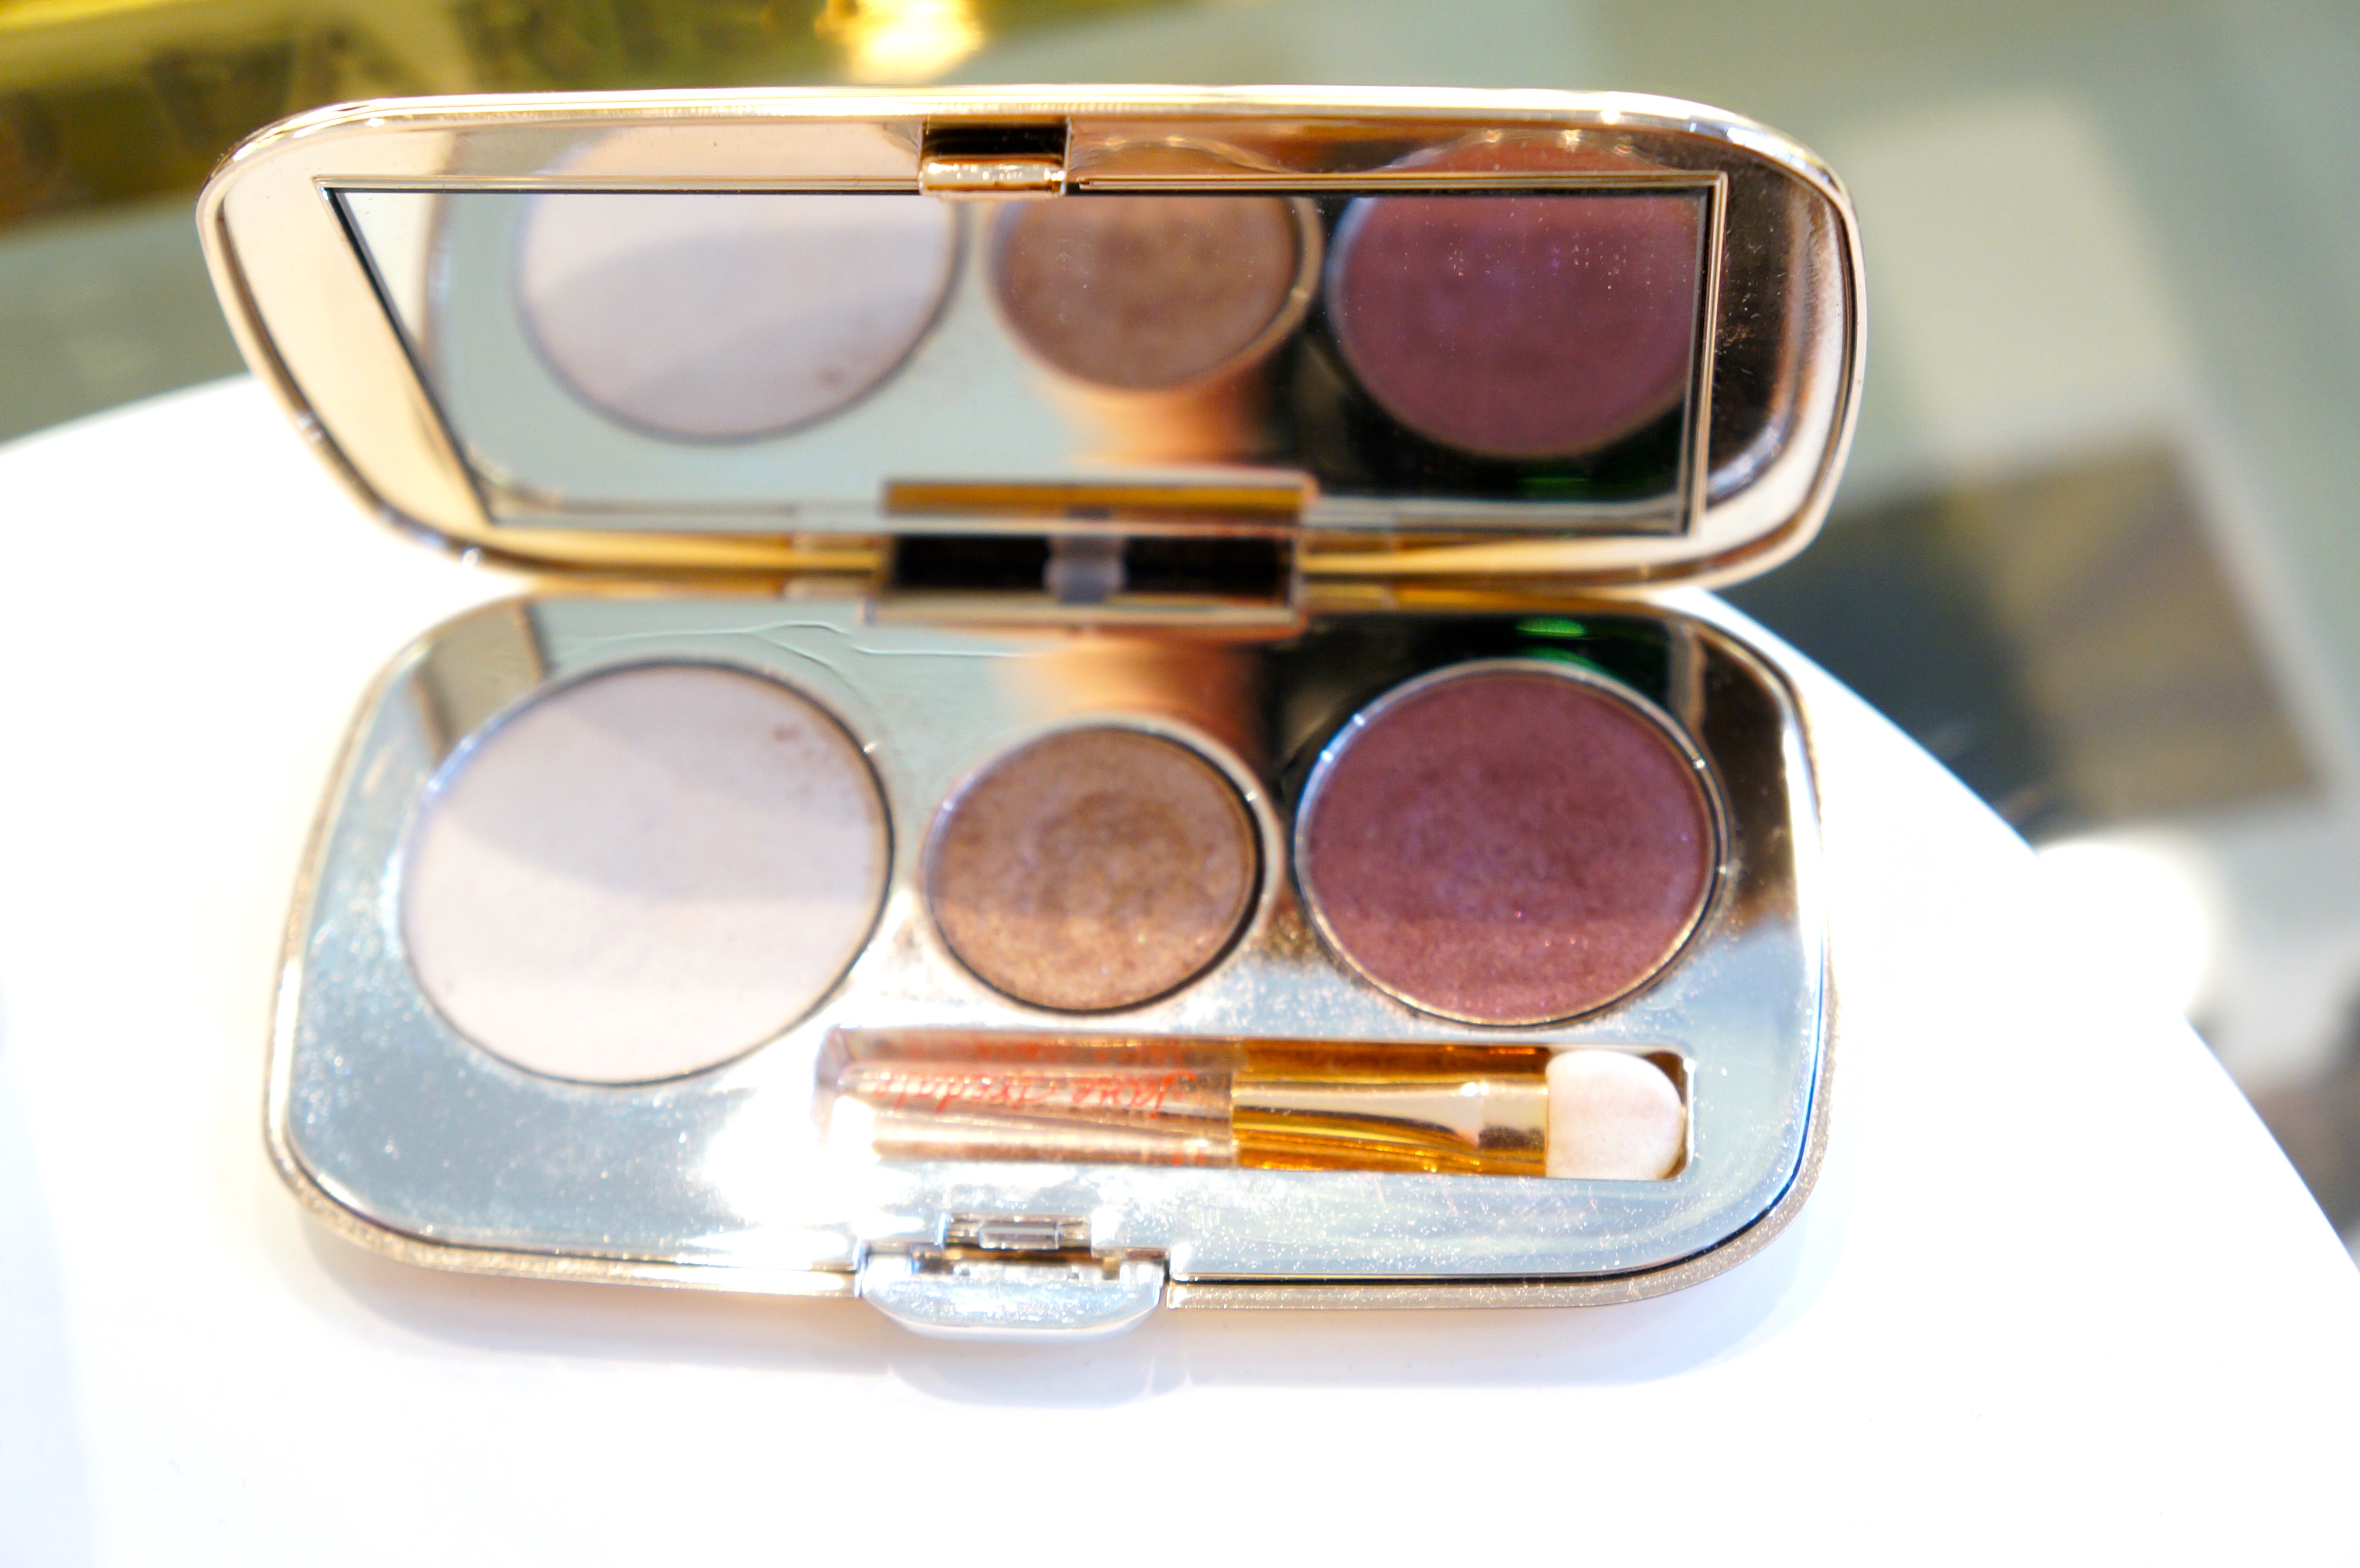 Jane Iredale A-W 2014 collection/ Pic by kiwikoo